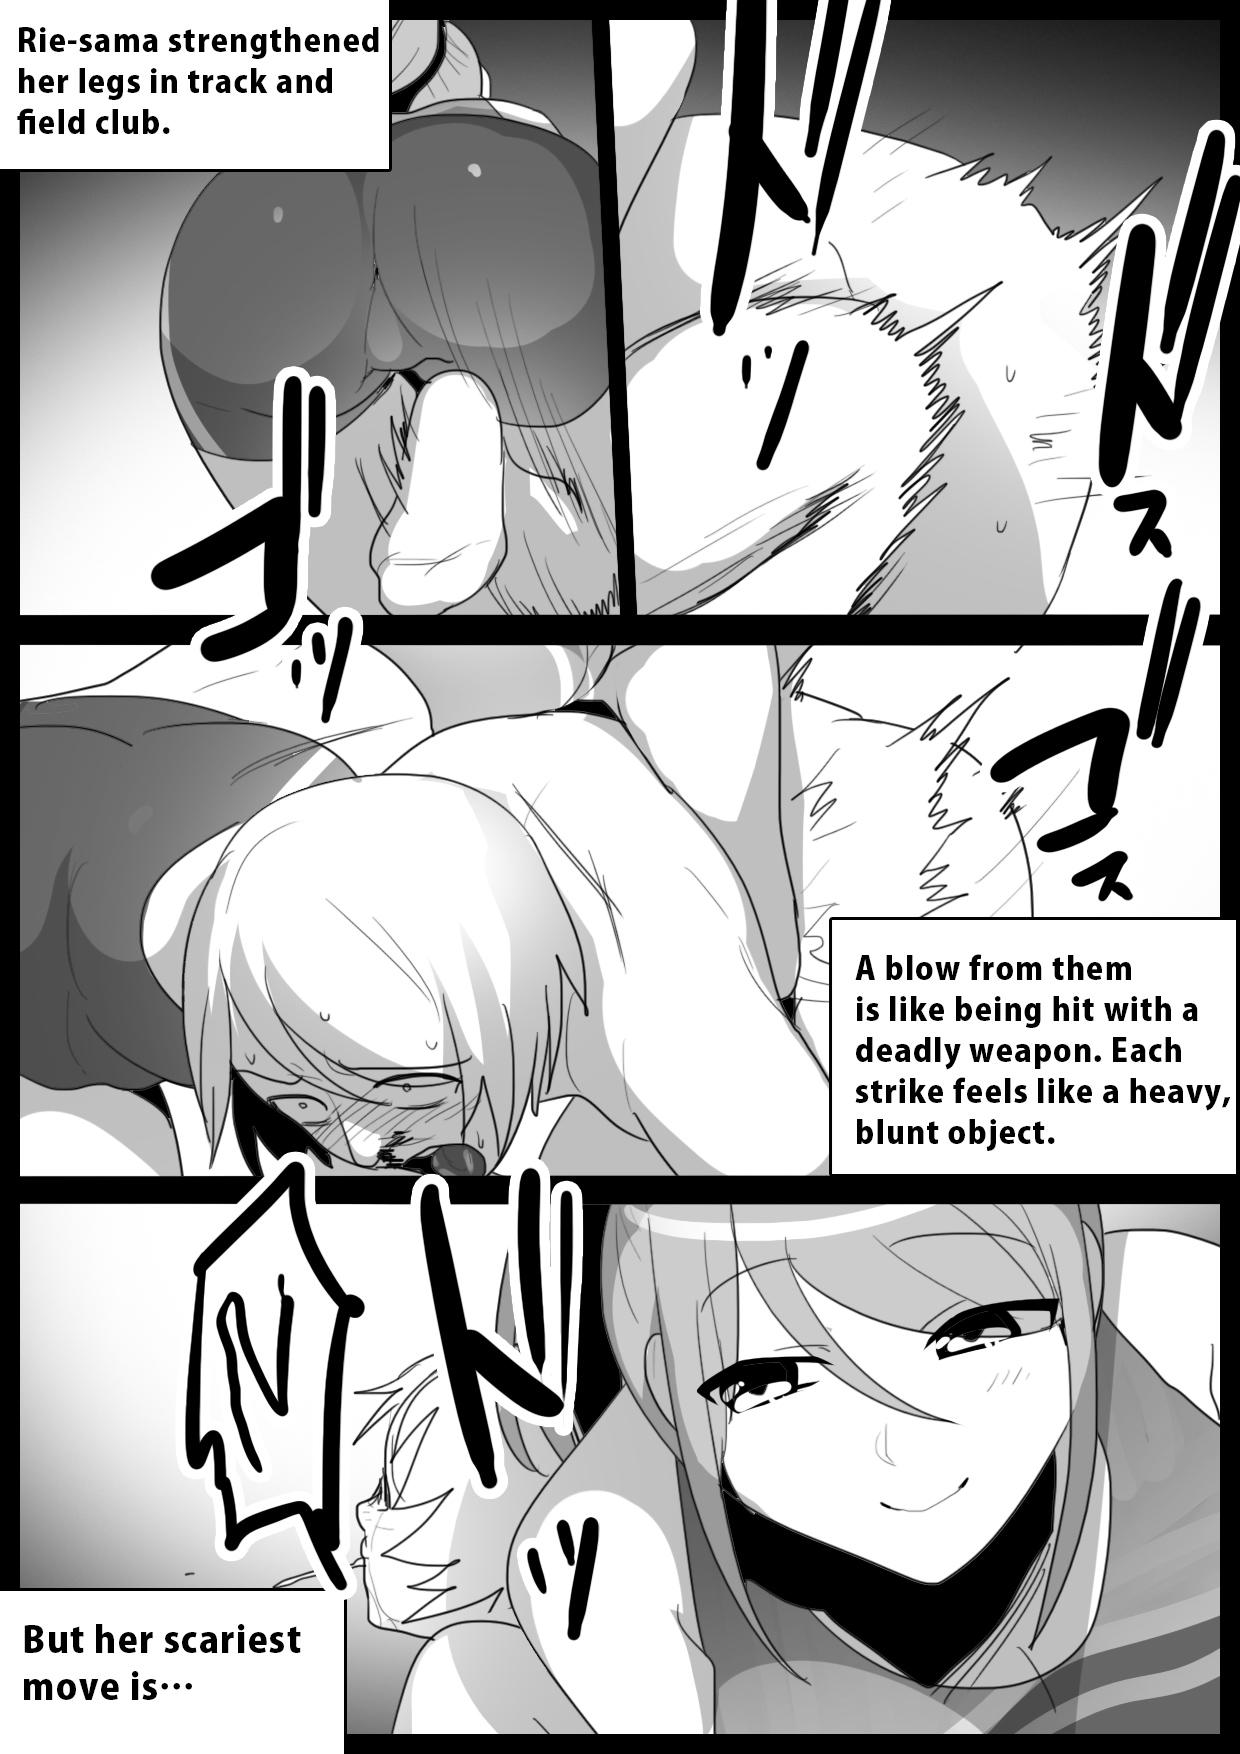 Huge Cock Spin-Off of Girls Beat by Rie - Original Wet Cunts - Page 6